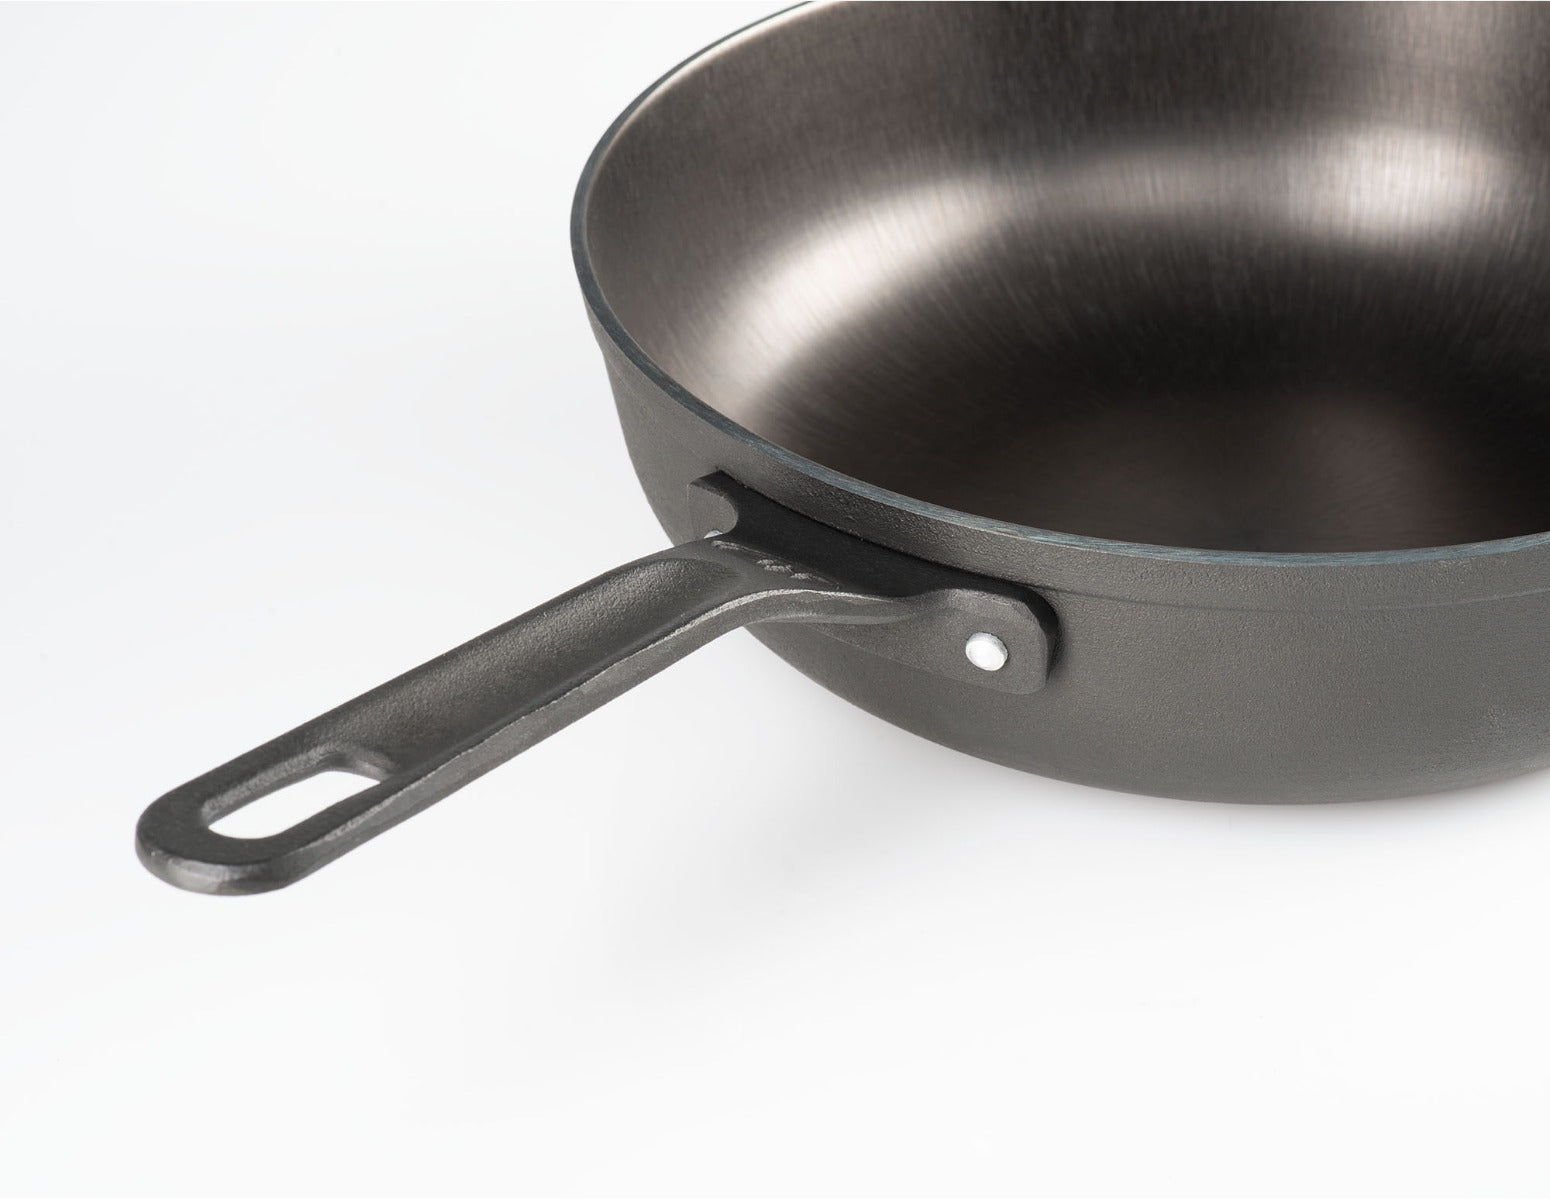 GUIDECAST Deep Frypan